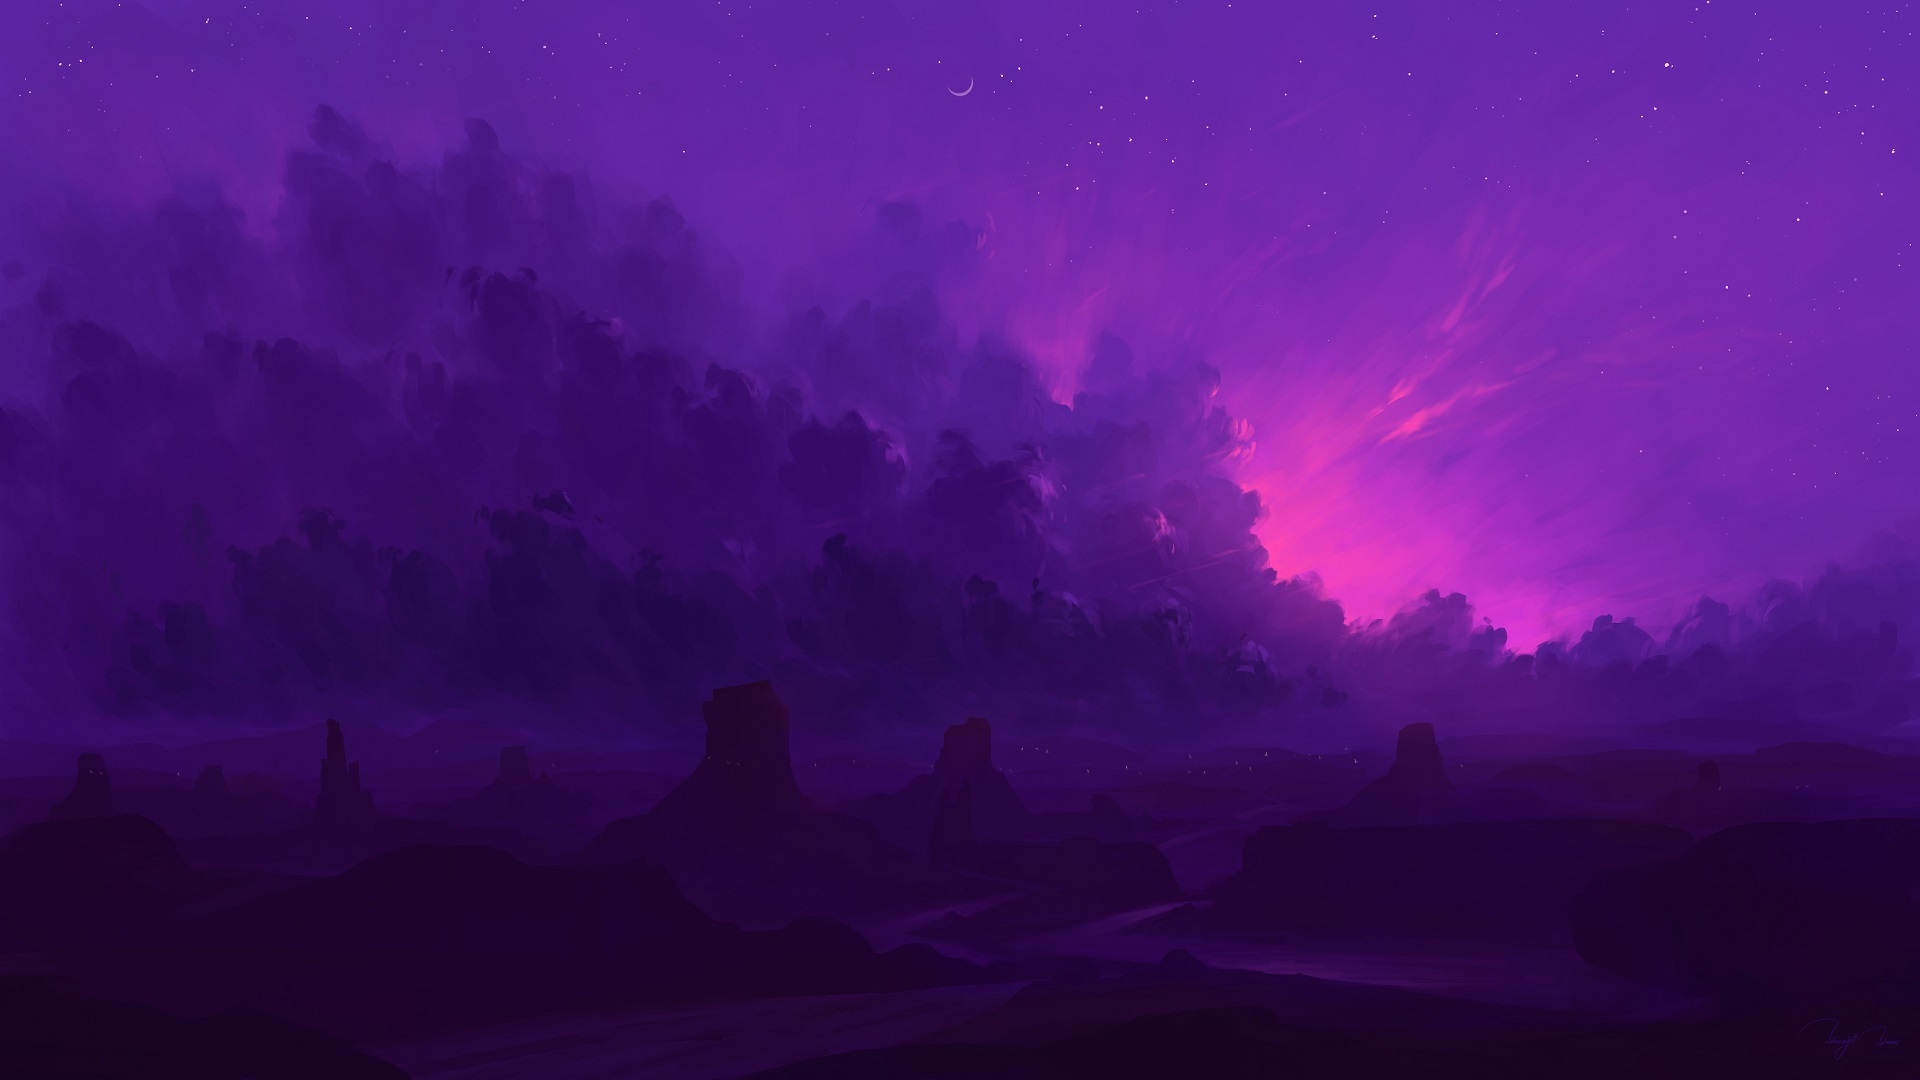 A purple sky with some trees and rocks - Beautiful